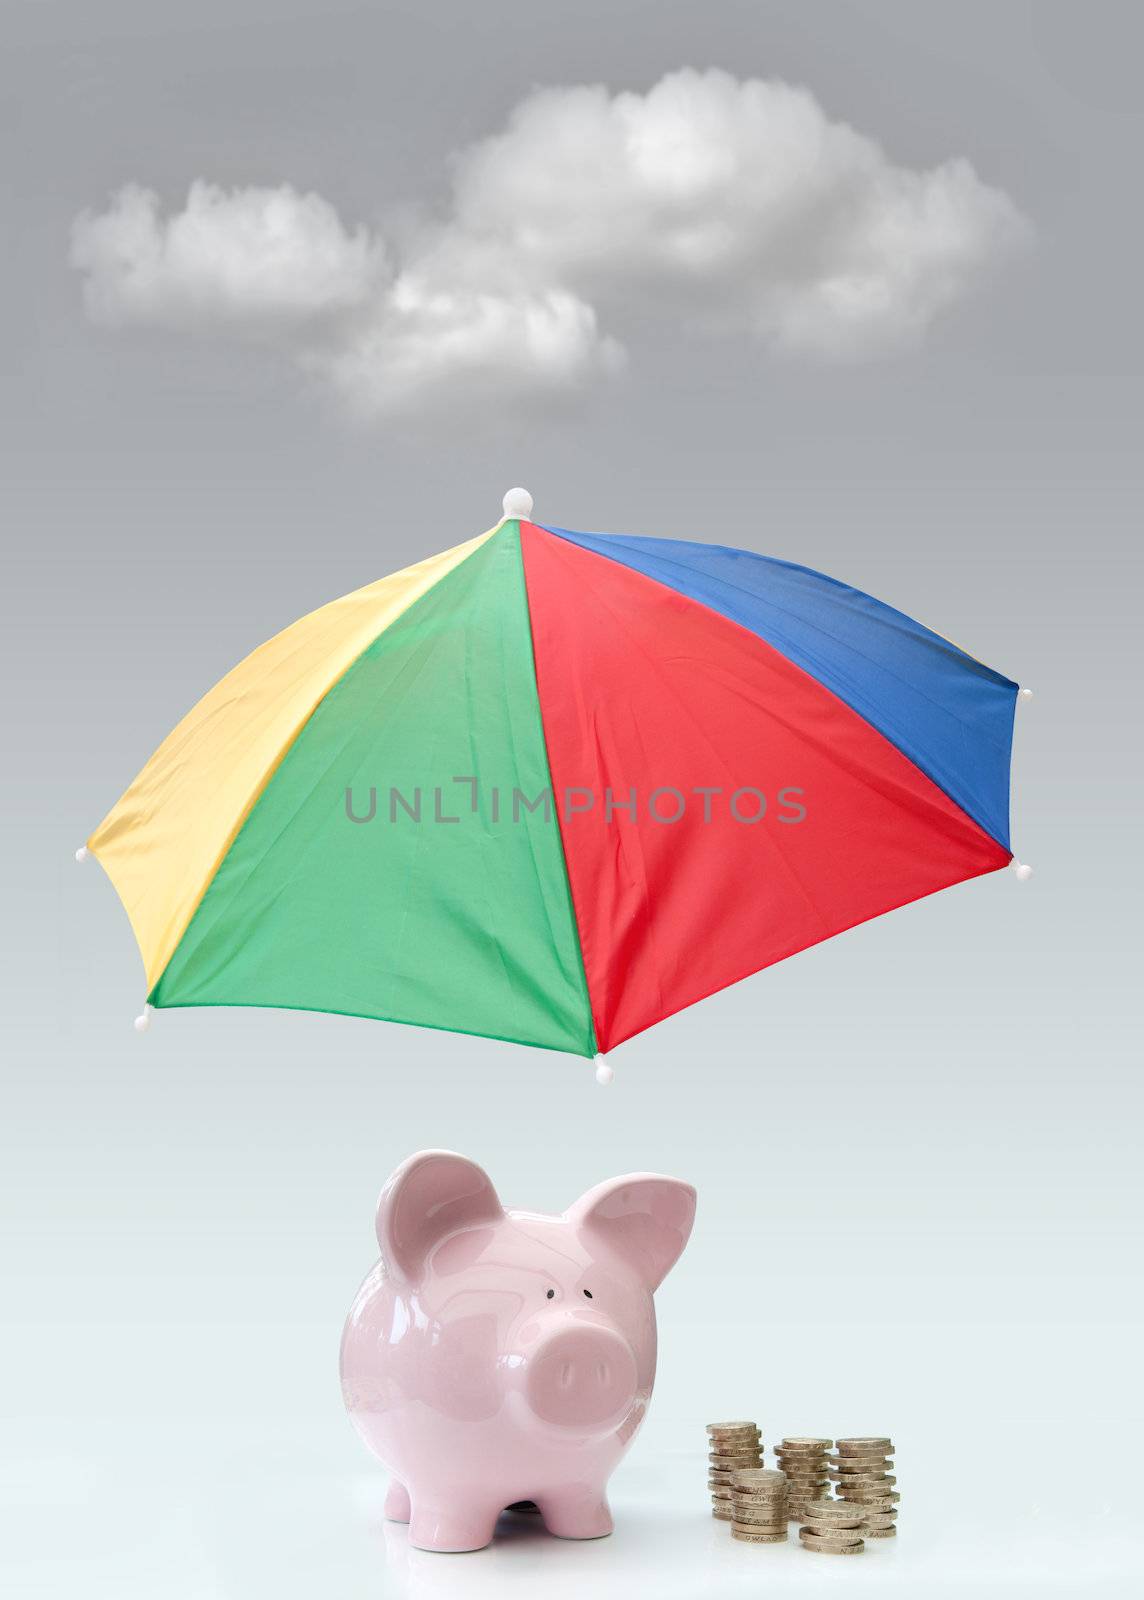 Umbrella shielding a piggybank and money from a hovering cloud